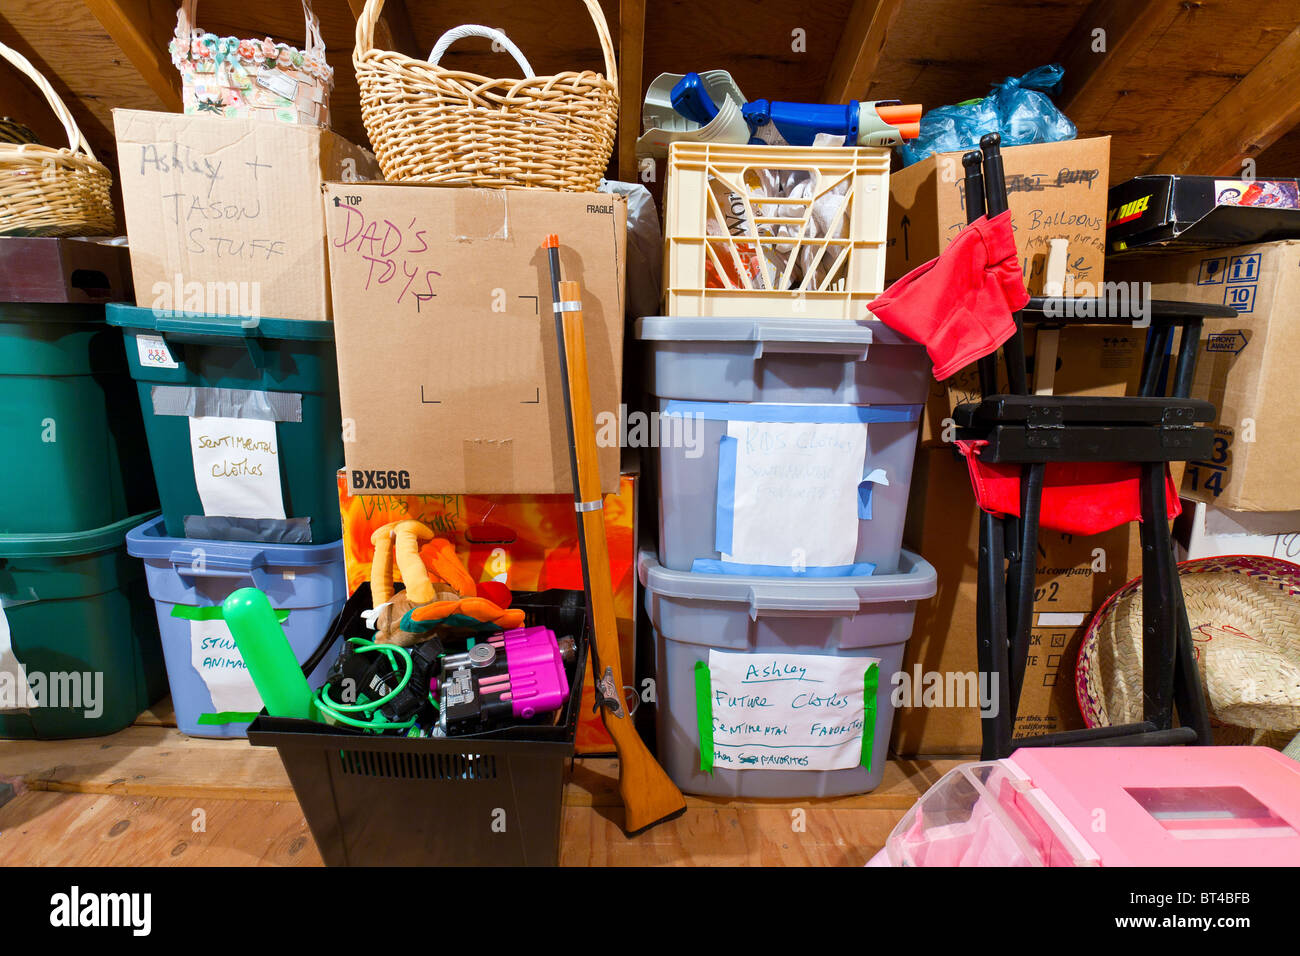 Boxes, Books and other things in Attic Storage. Stock Photo